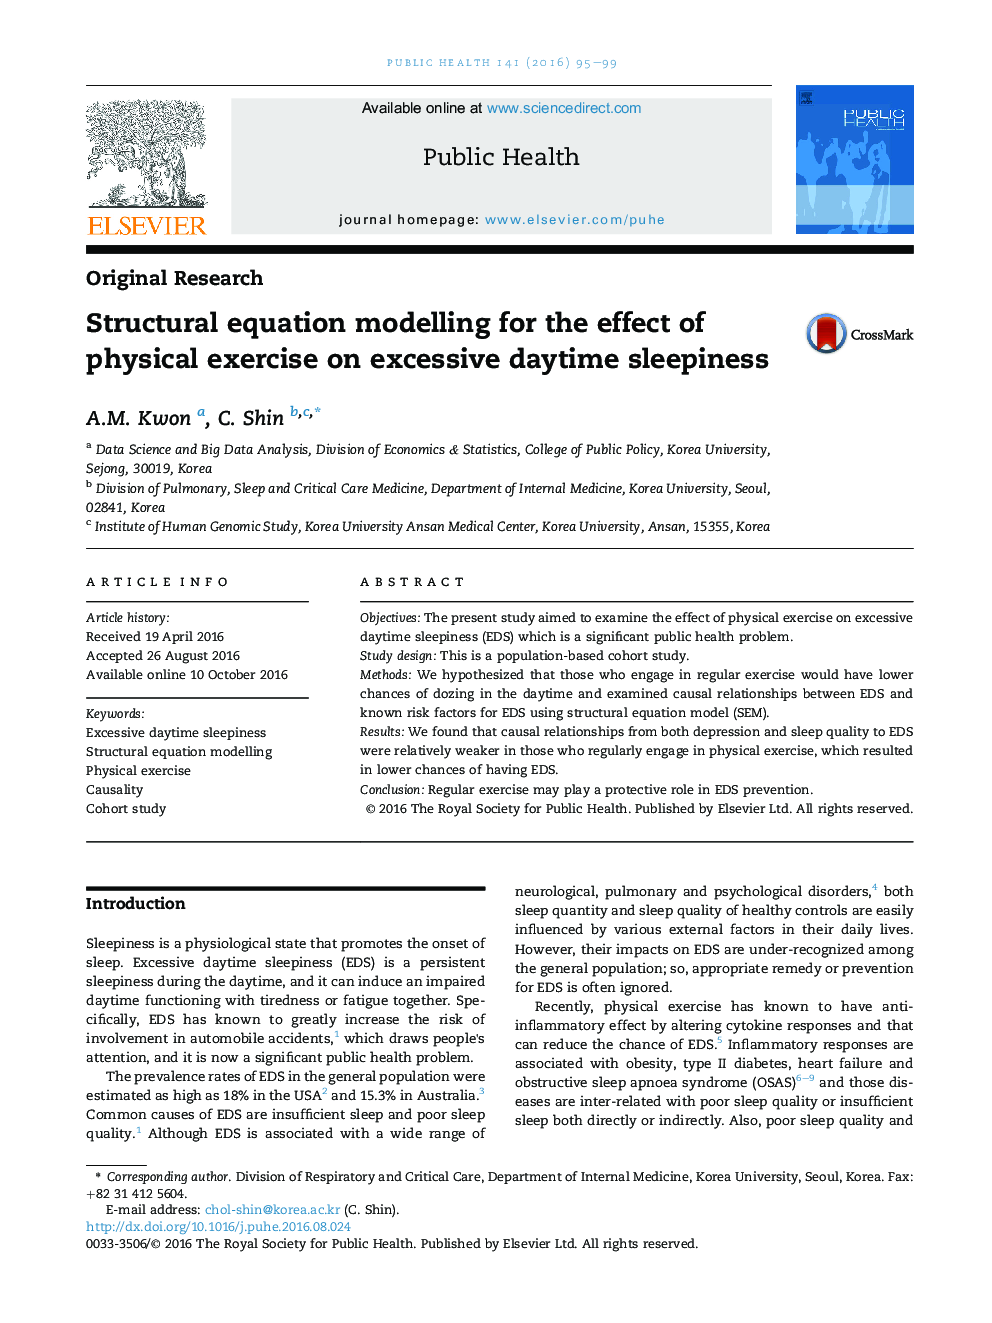 Structural equation modelling for the effect of physical exercise on excessive daytime sleepiness